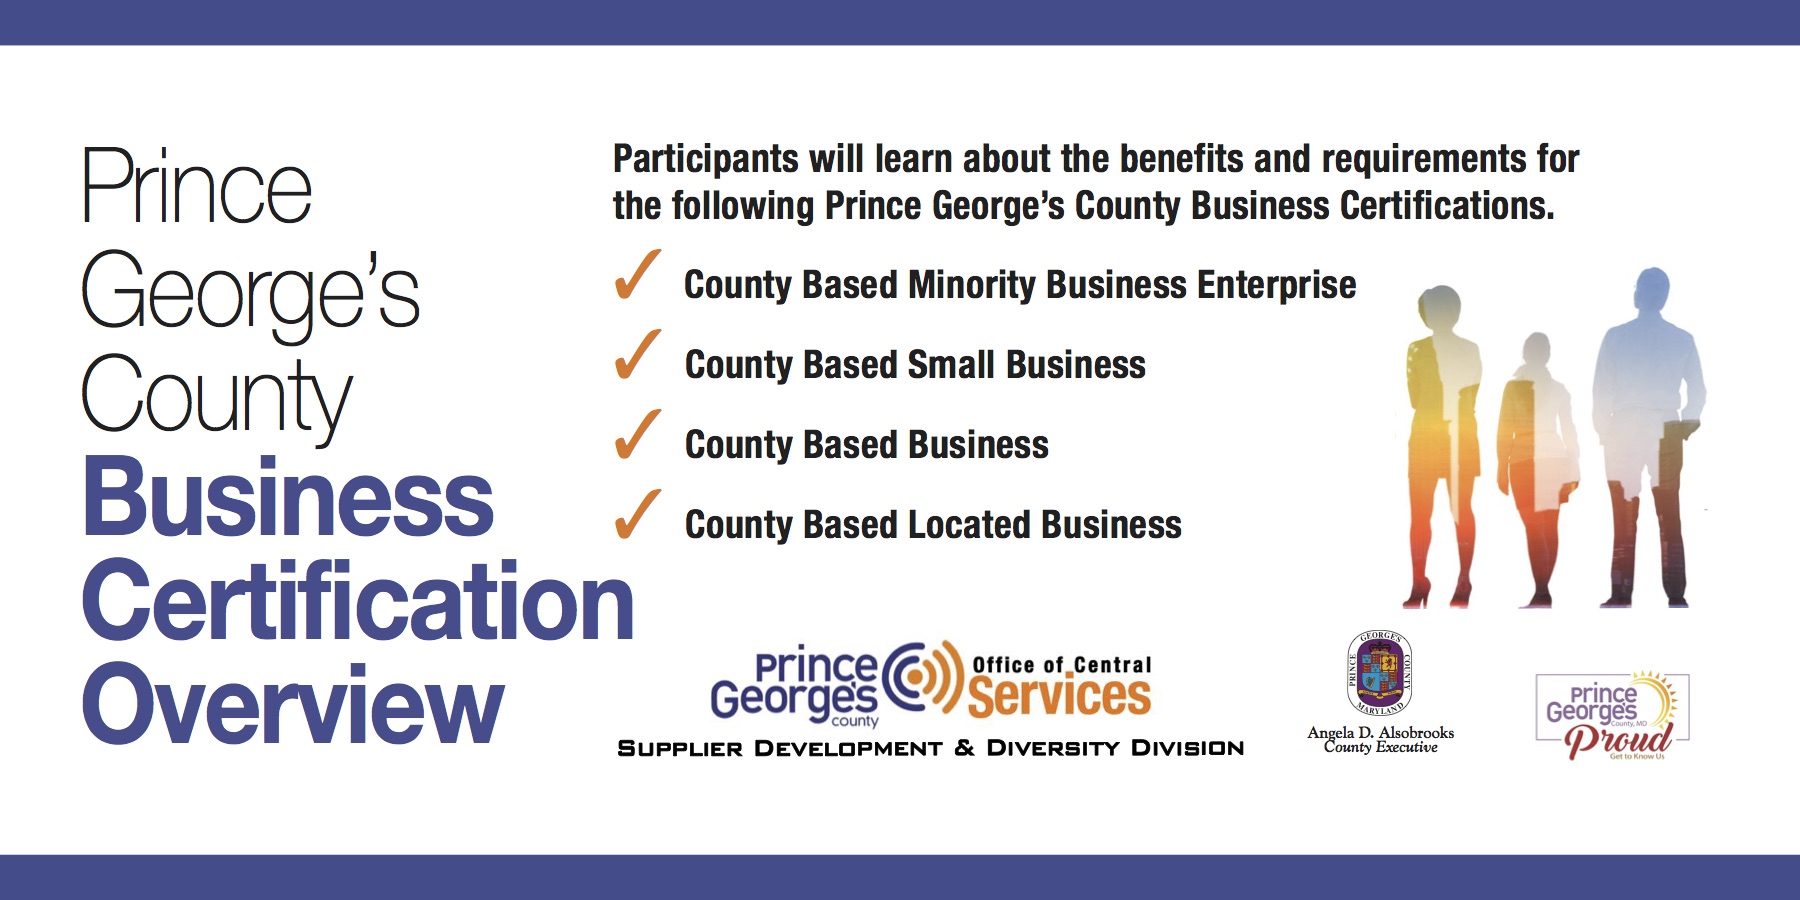 Prince George's Business Certification Overview - Register in Advance